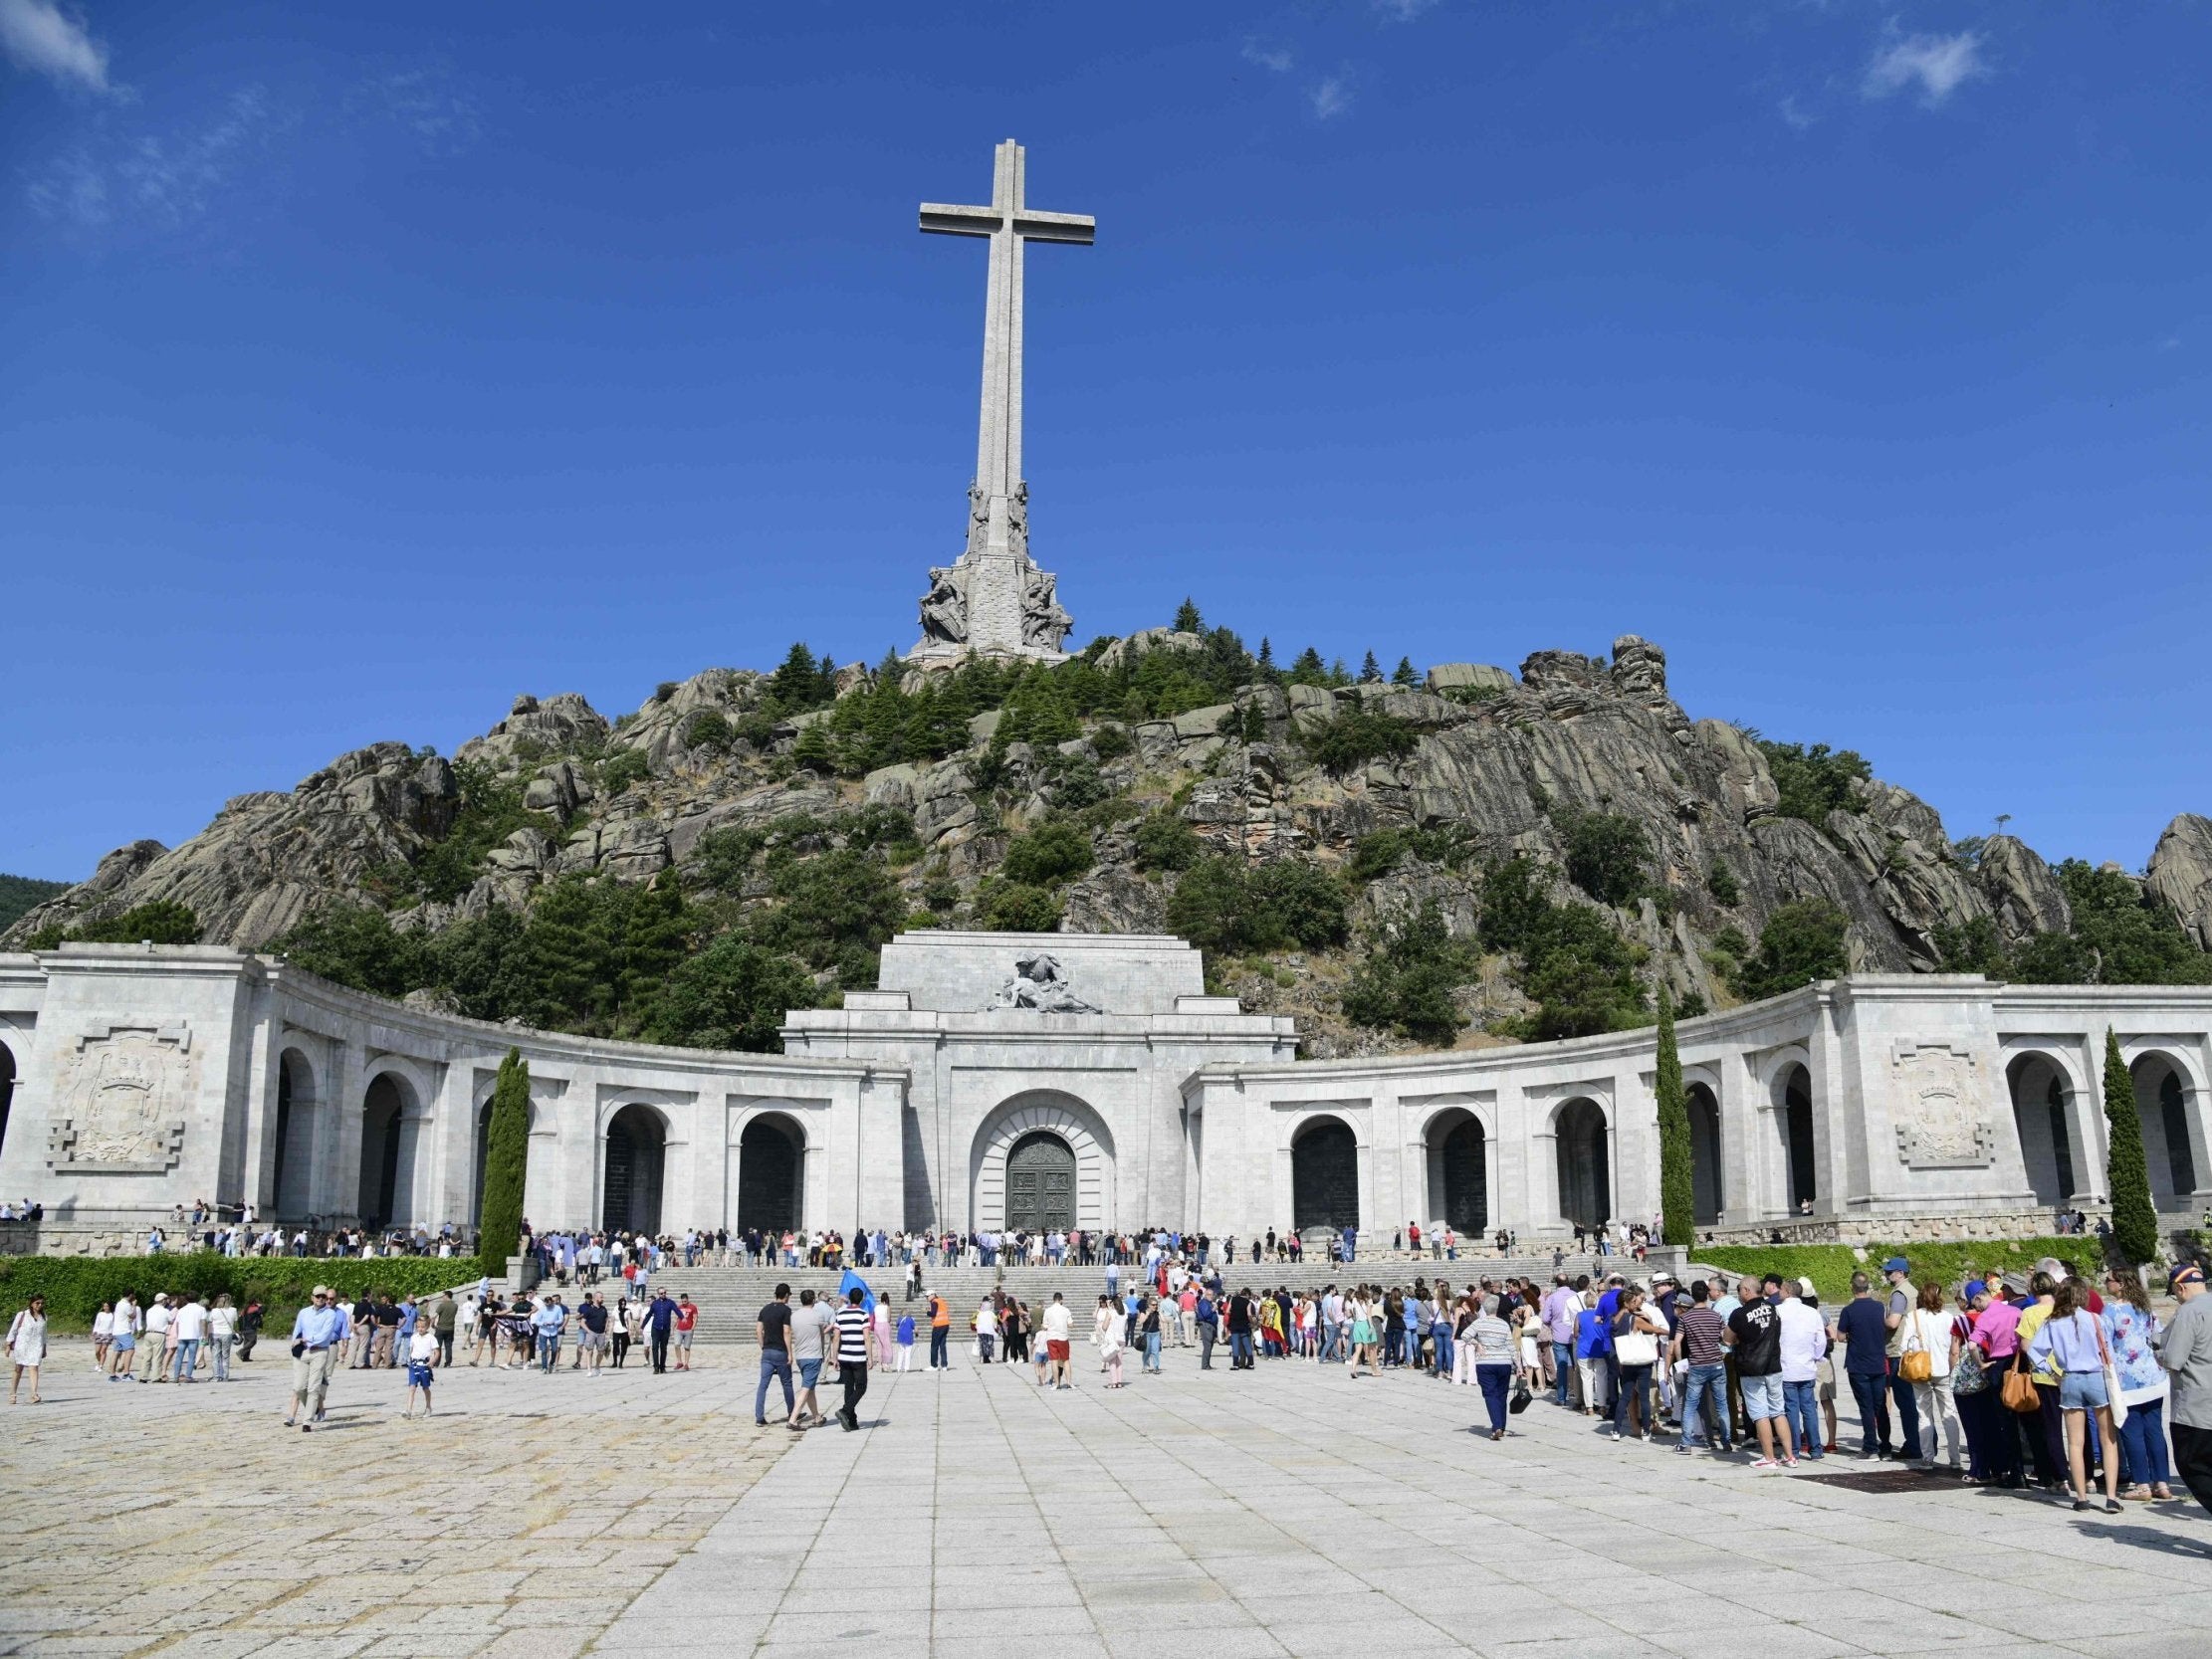 A plan to remove the dictator's remains from the Valley of the Fallen is contentious